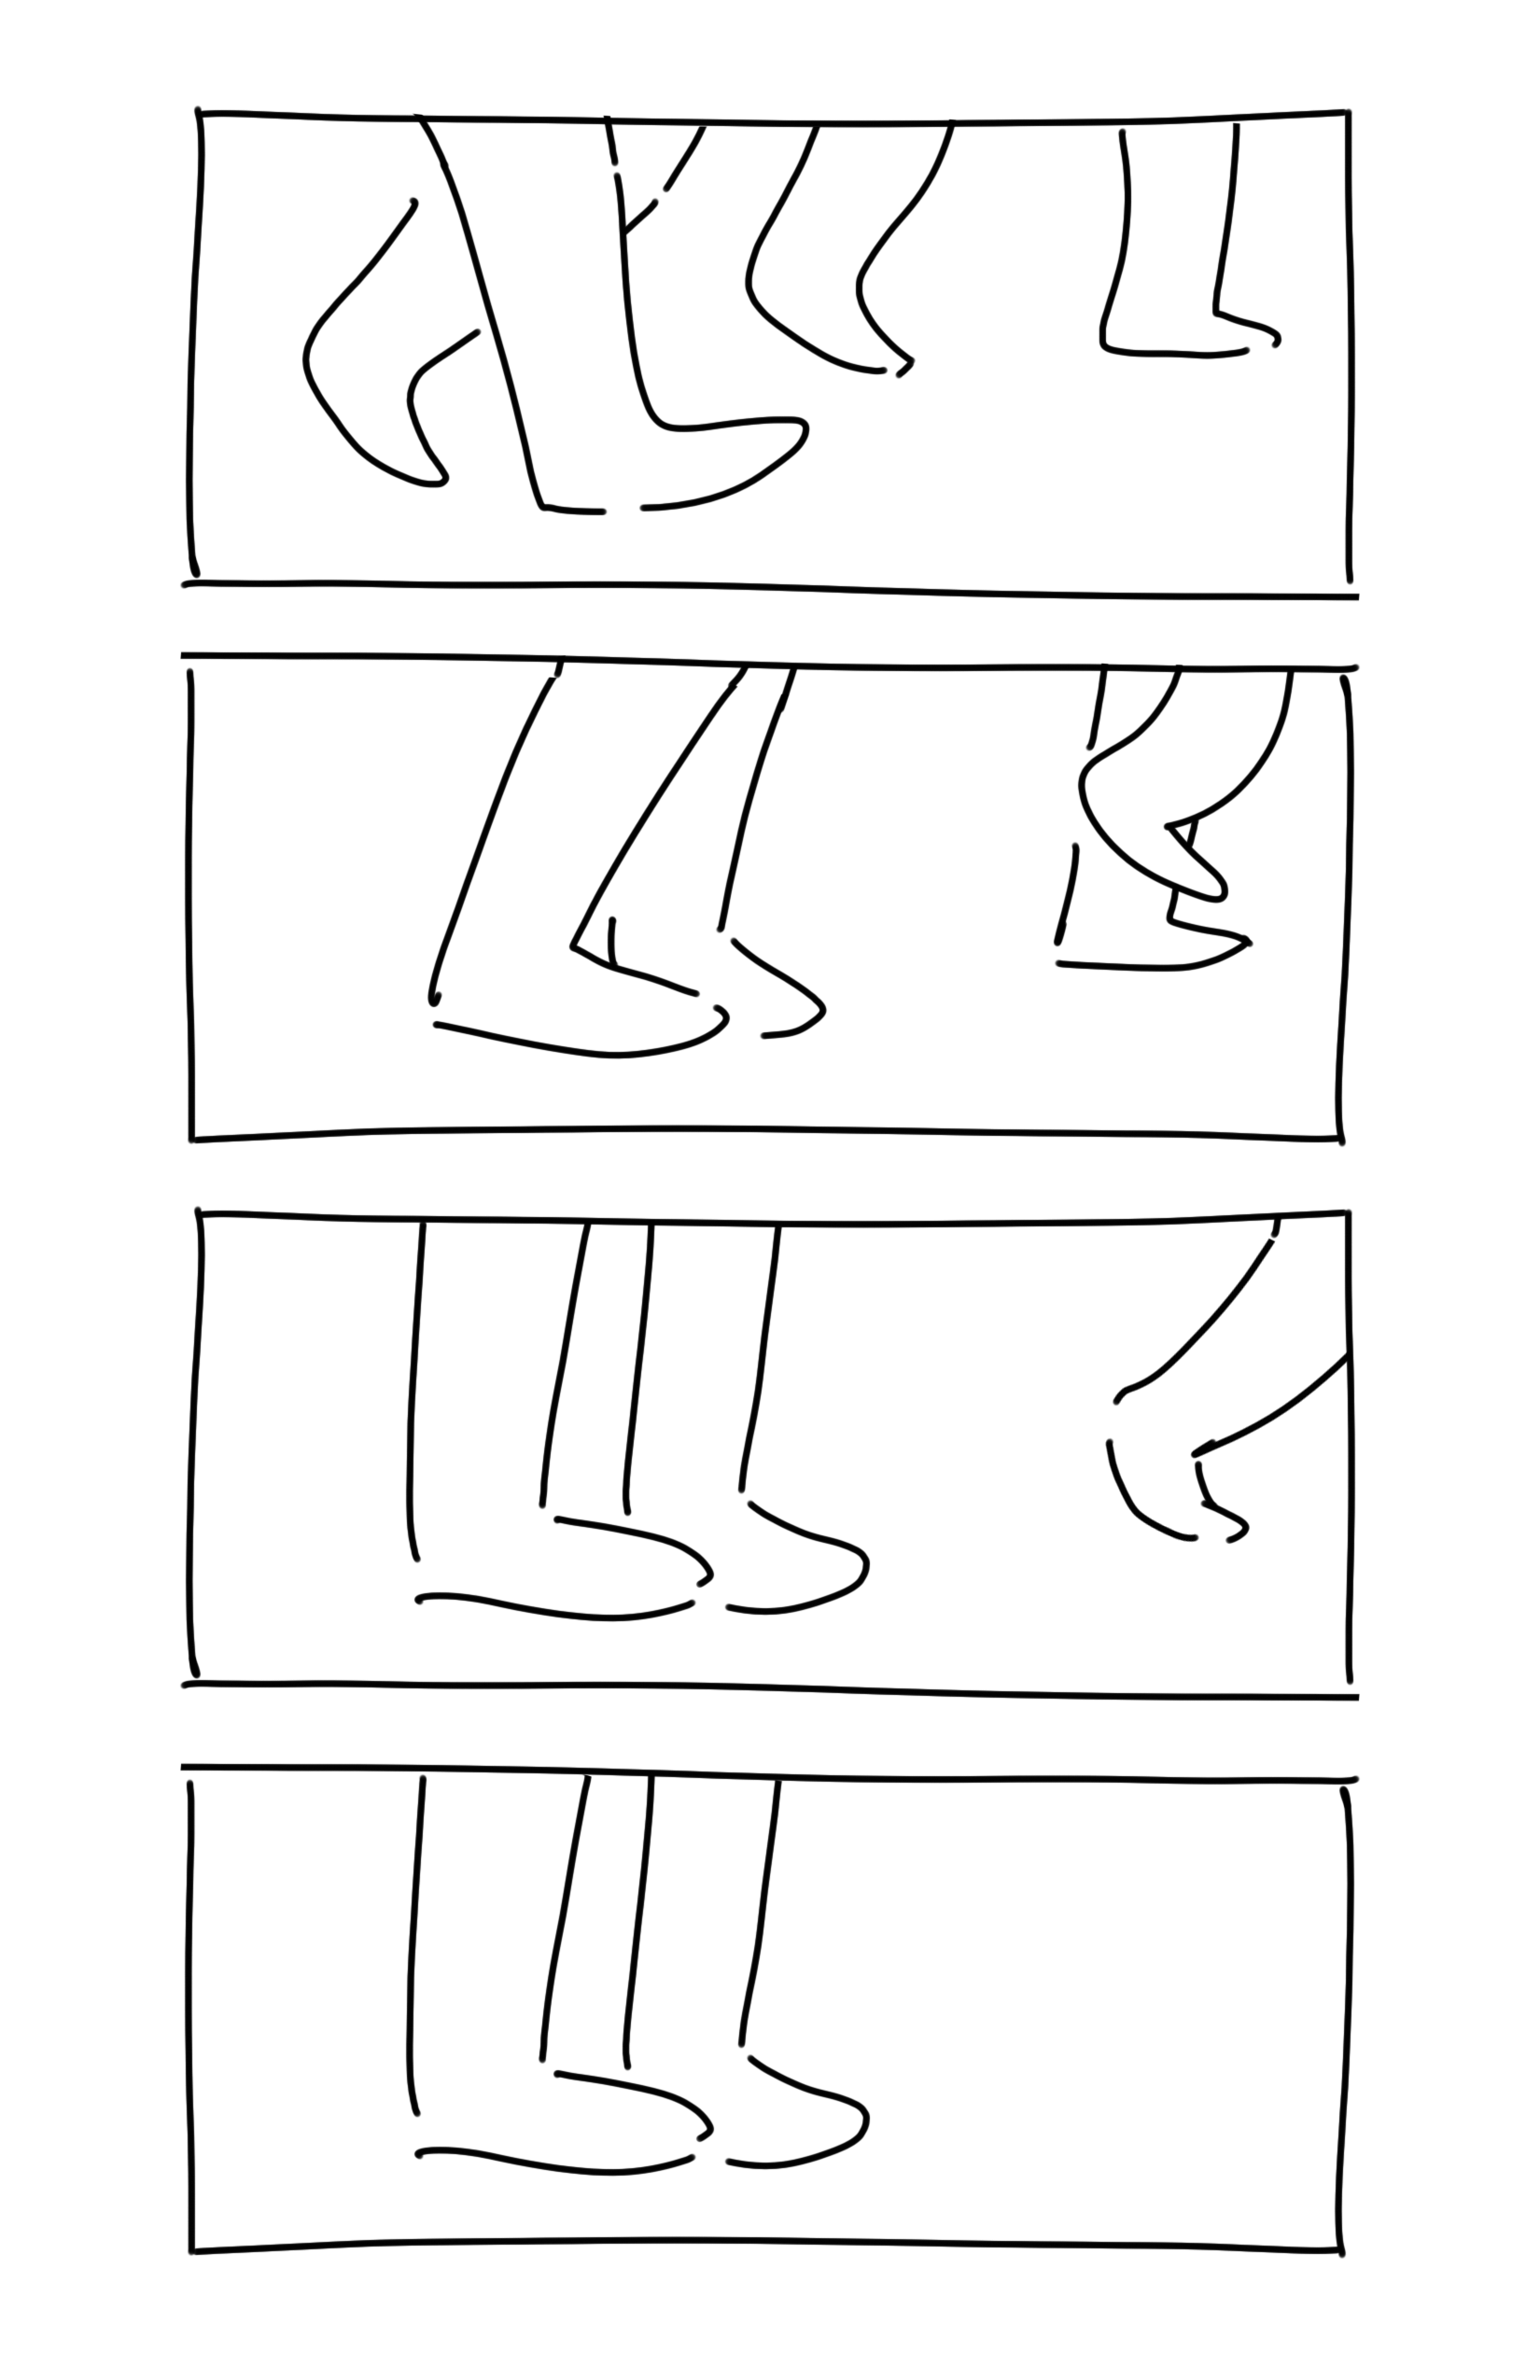 Panel 1: two sets of legs walking.
Panel 2: The legs on the left come to a stop as the legs on the right keep walking.
Panel 3: The legs on the left stand still. The legs on the right start to disappear off panel as they keep walking.
Panel 4: The legs on the left stand alone.